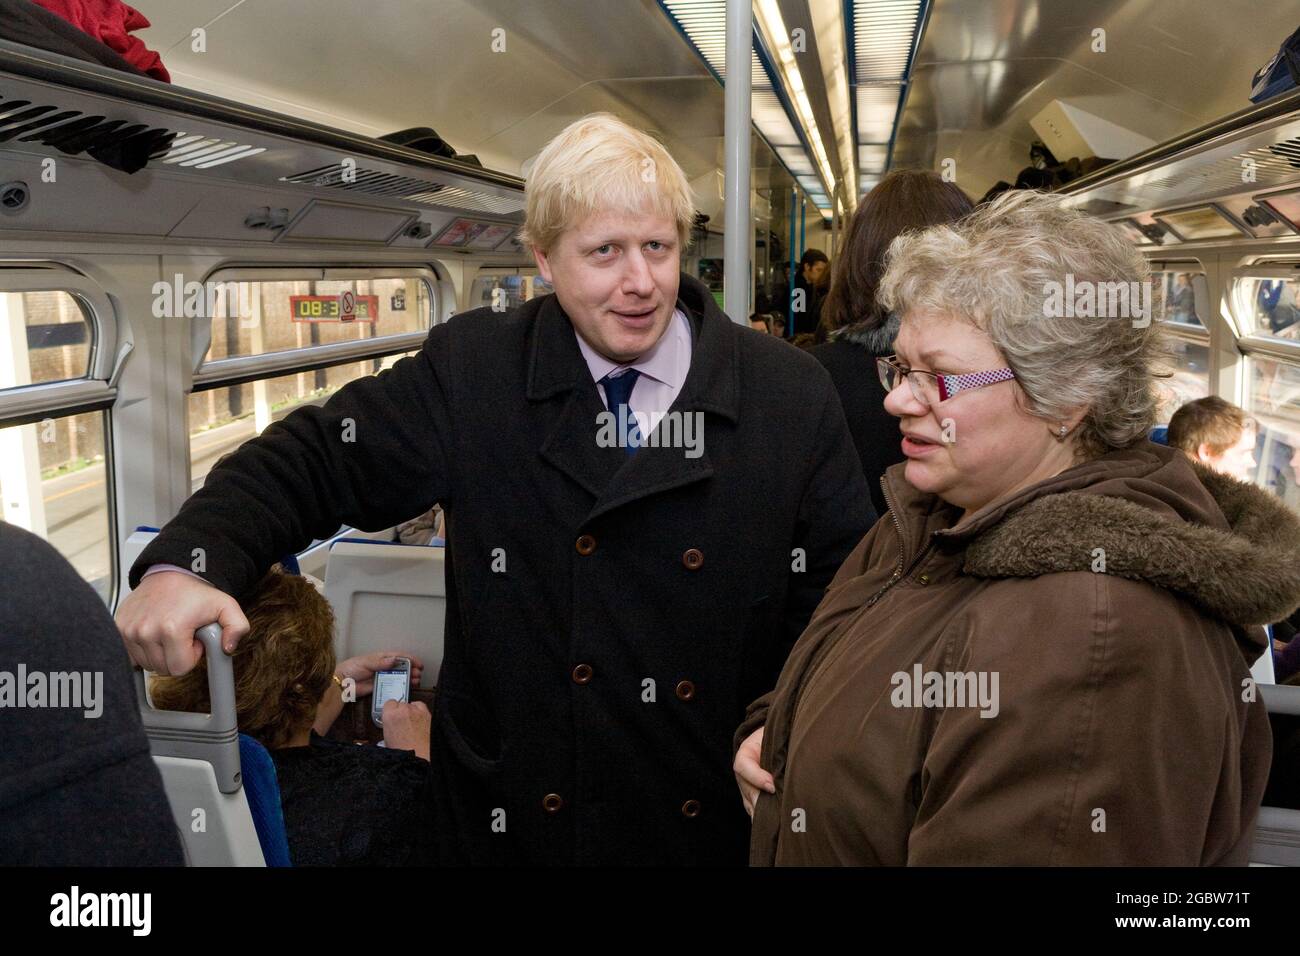 Boris Johnson, conservative candidate for Mayor of London traveling up to Waterloo East on 7.56 from Crayford. Talking with regular commuter Alicja Chapman from Sidcup. His journey was to see what traveling conditions are like for rail commuters coming from southern suburbs into central London.  London, UK.  25 Feb 2008 Stock Photo